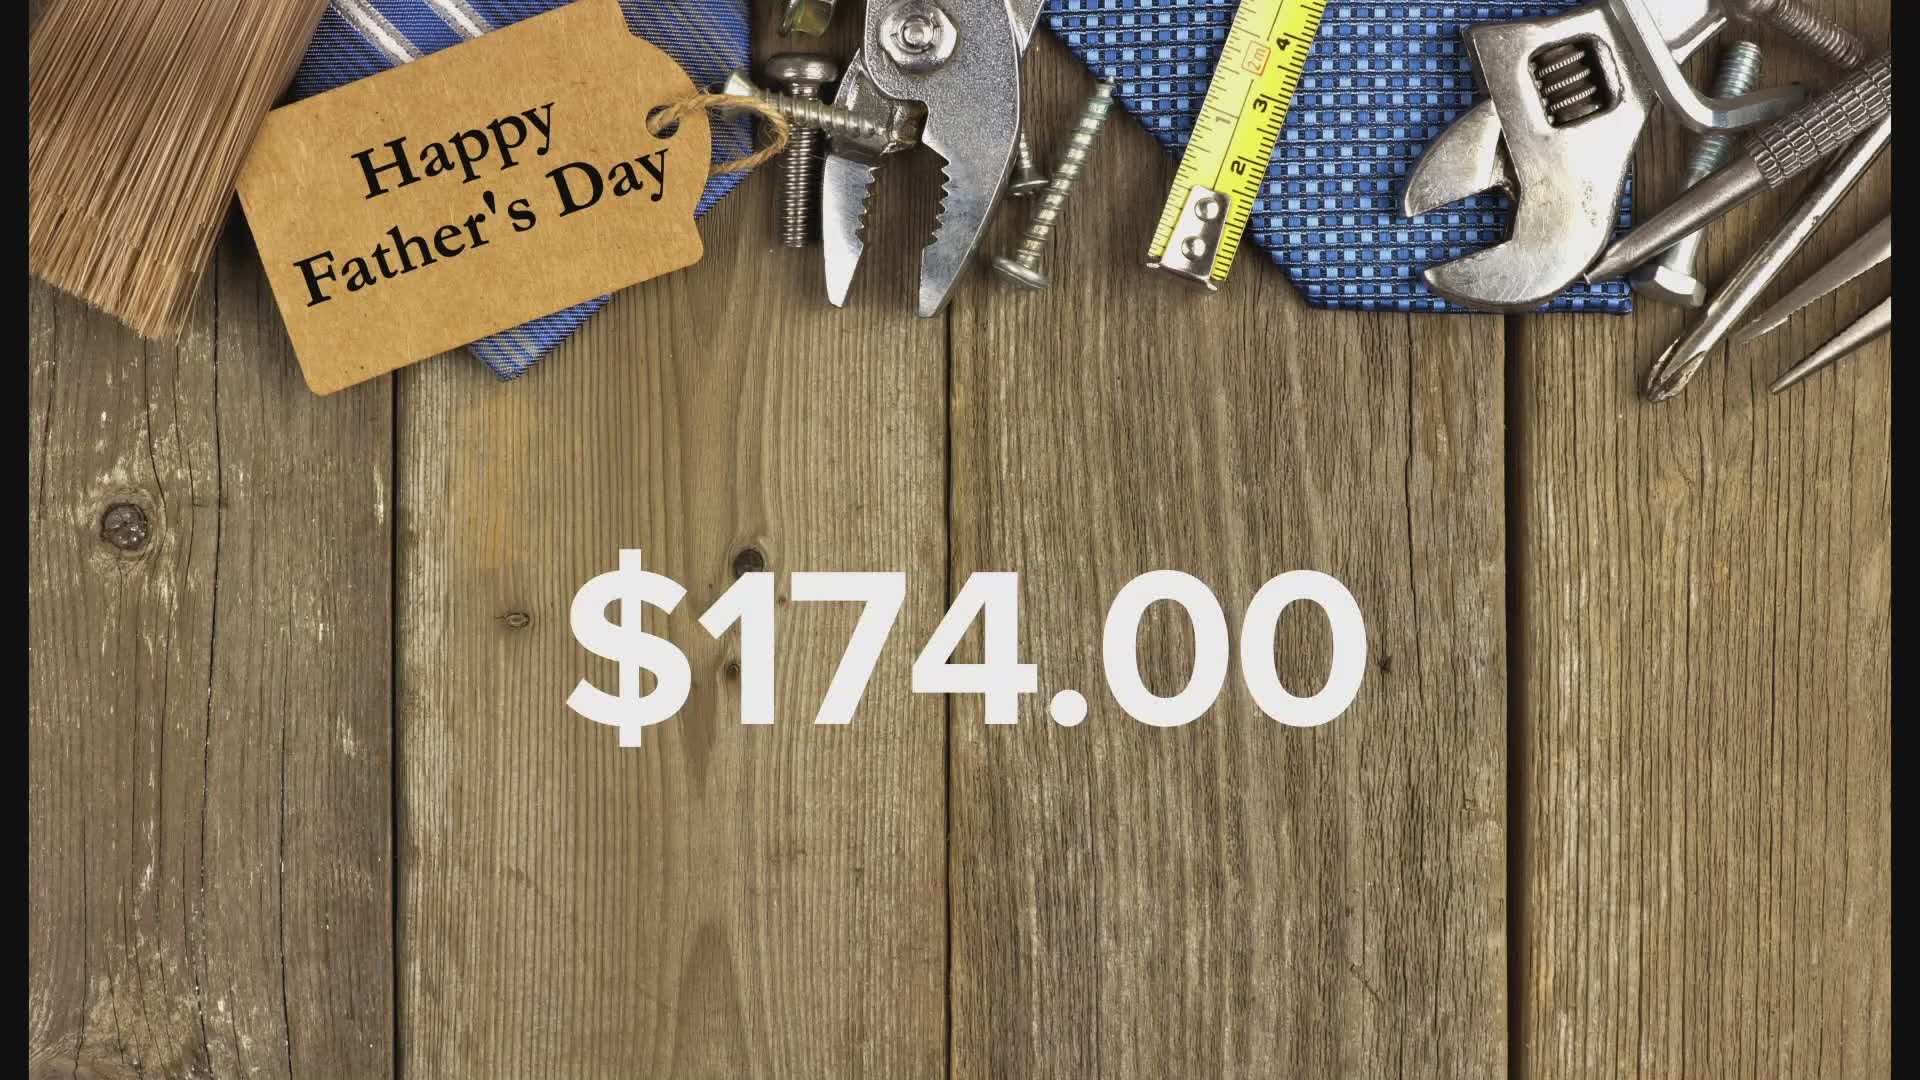 Americans are expected to spend more than $20.1 billion for Father’s Day gifts and goodies this year.